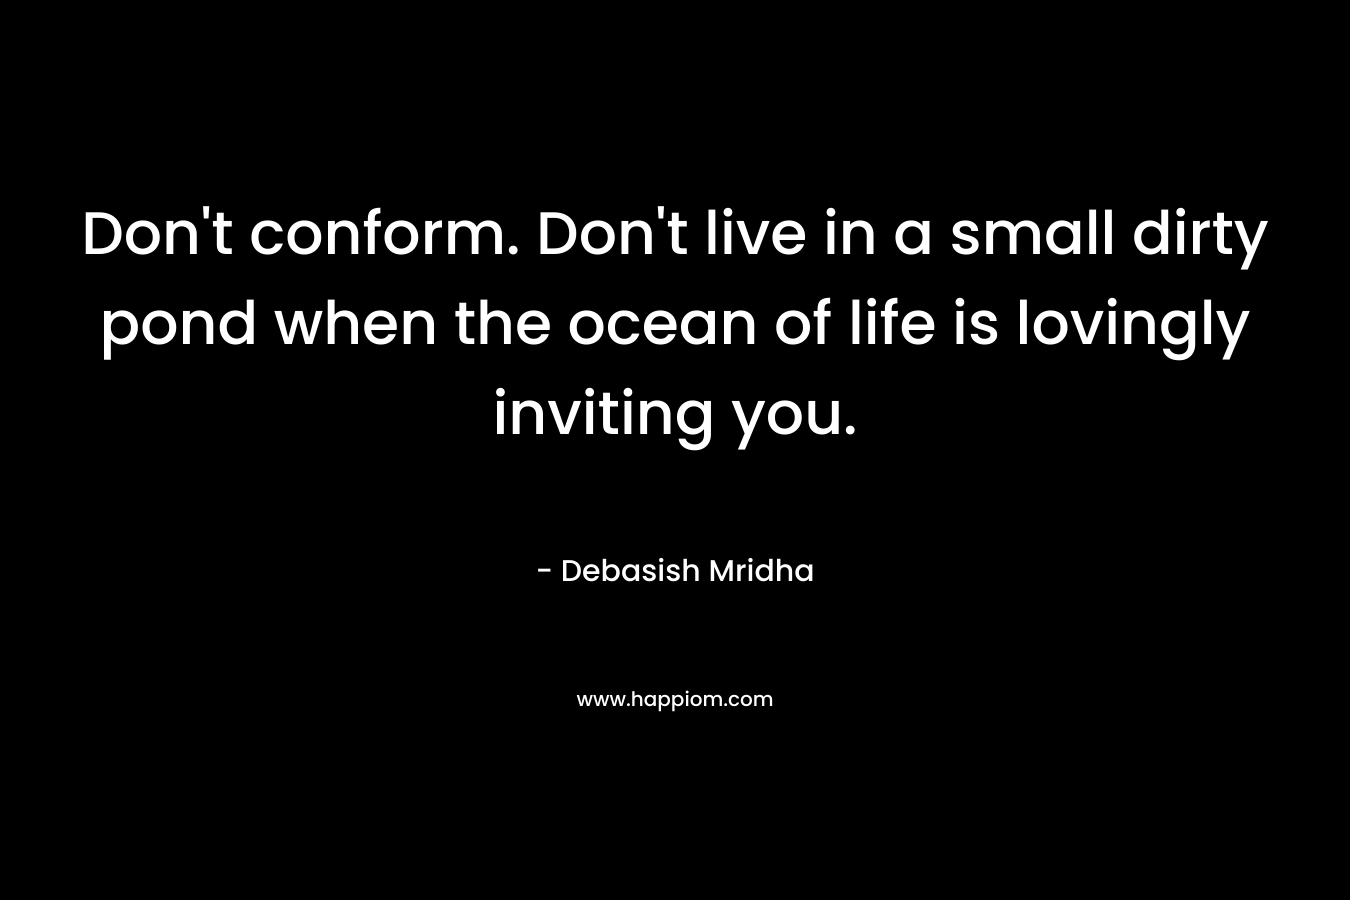 Don't conform. Don't live in a small dirty pond when the ocean of life is lovingly inviting you.